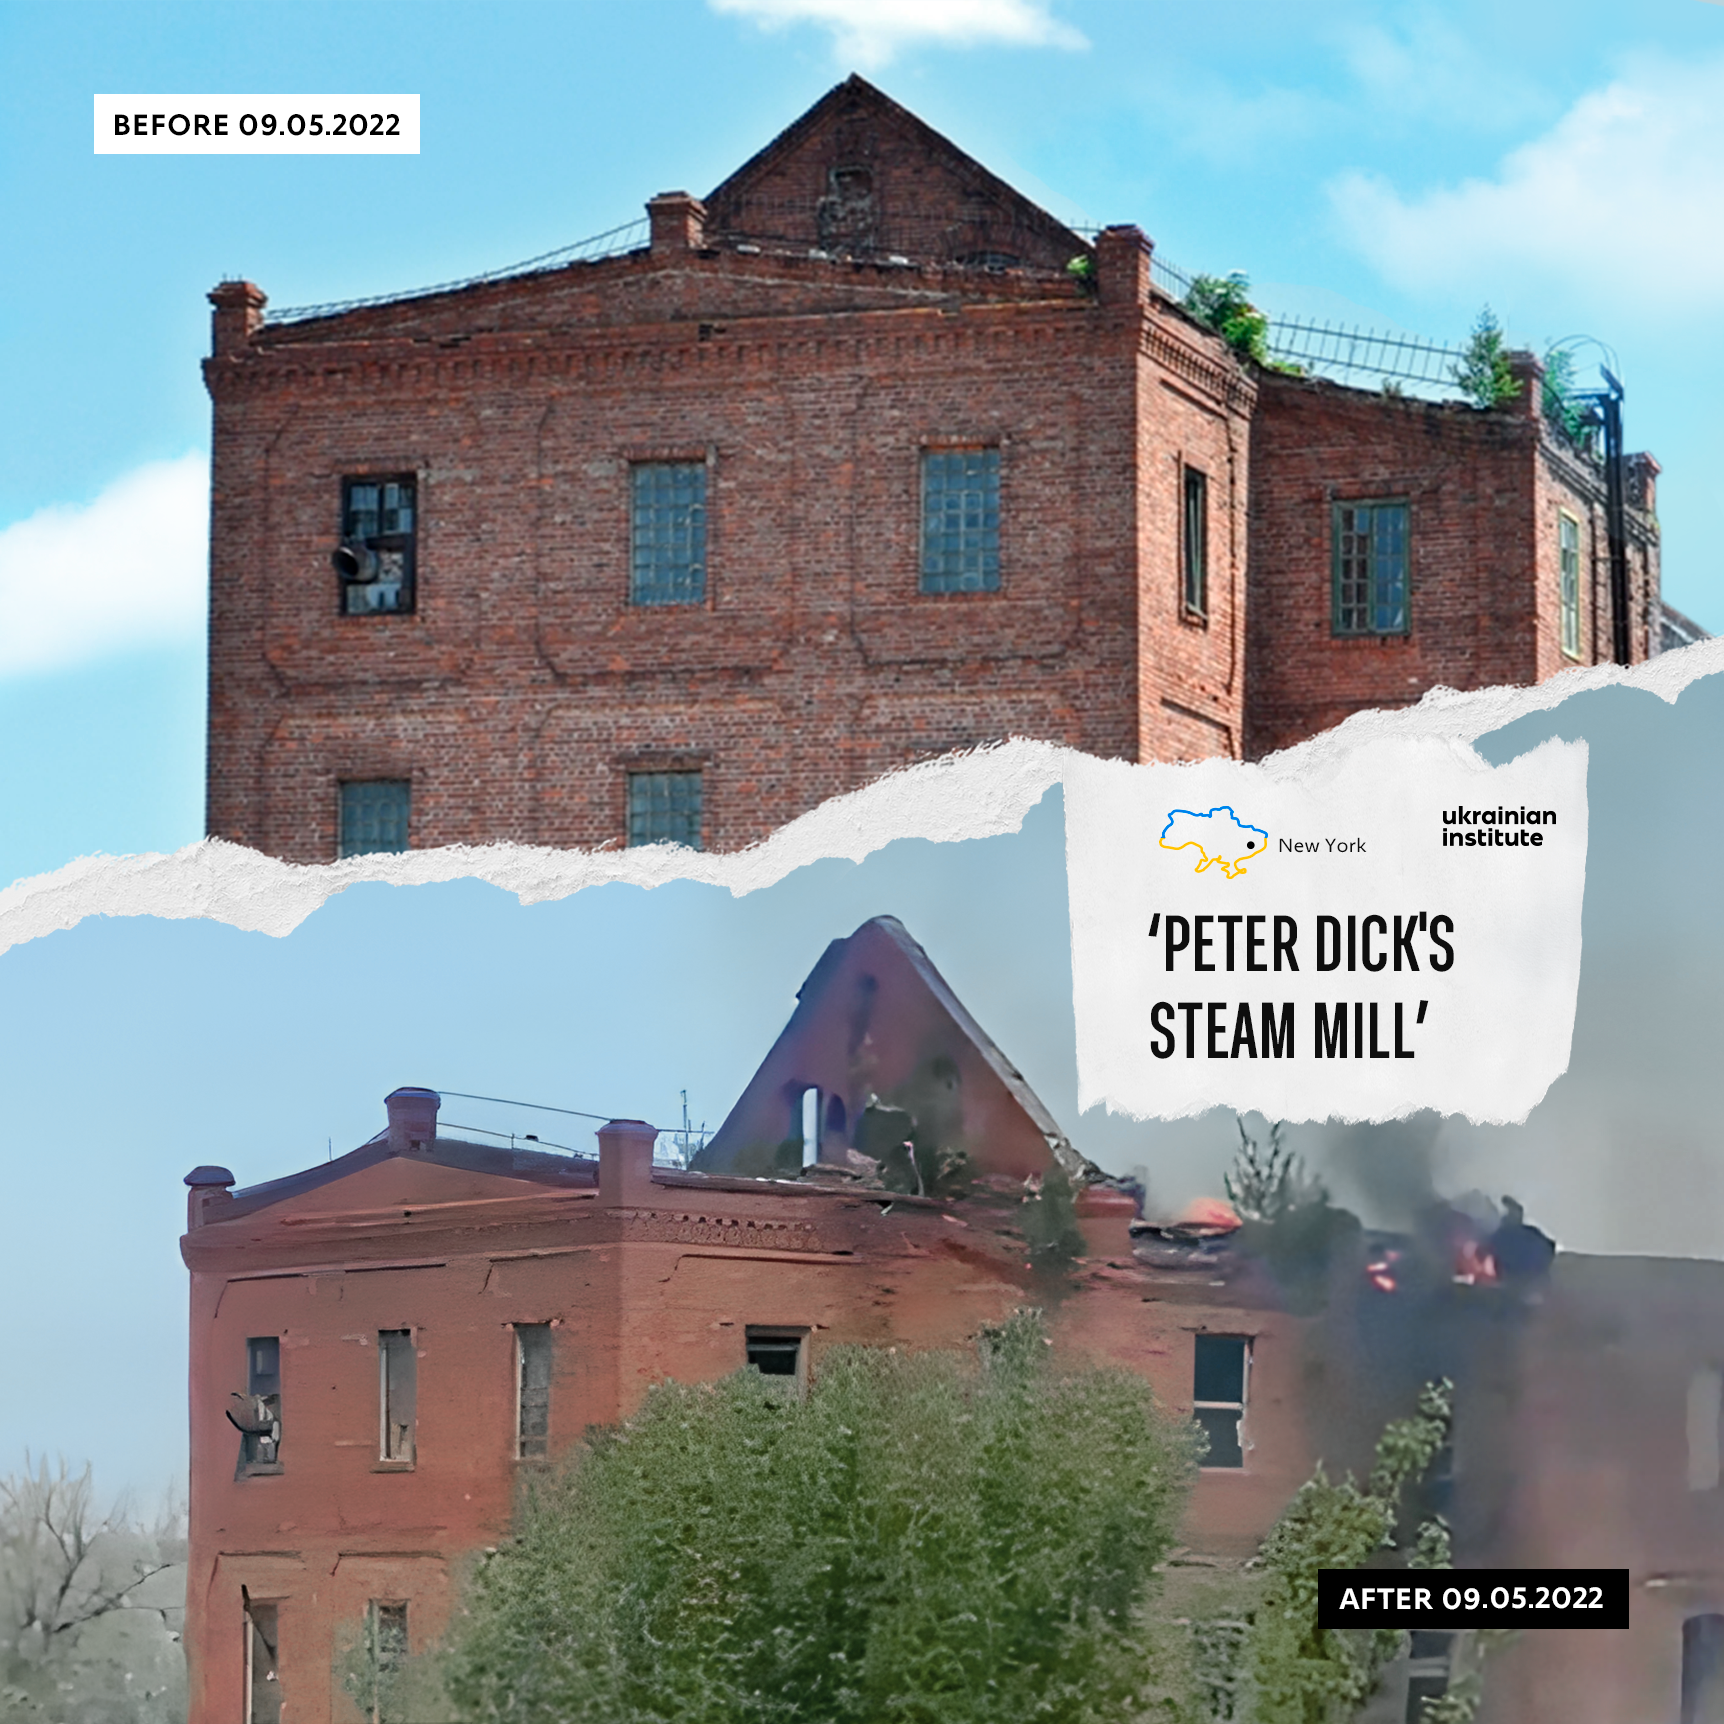 Peter Dick’s Steam Mill